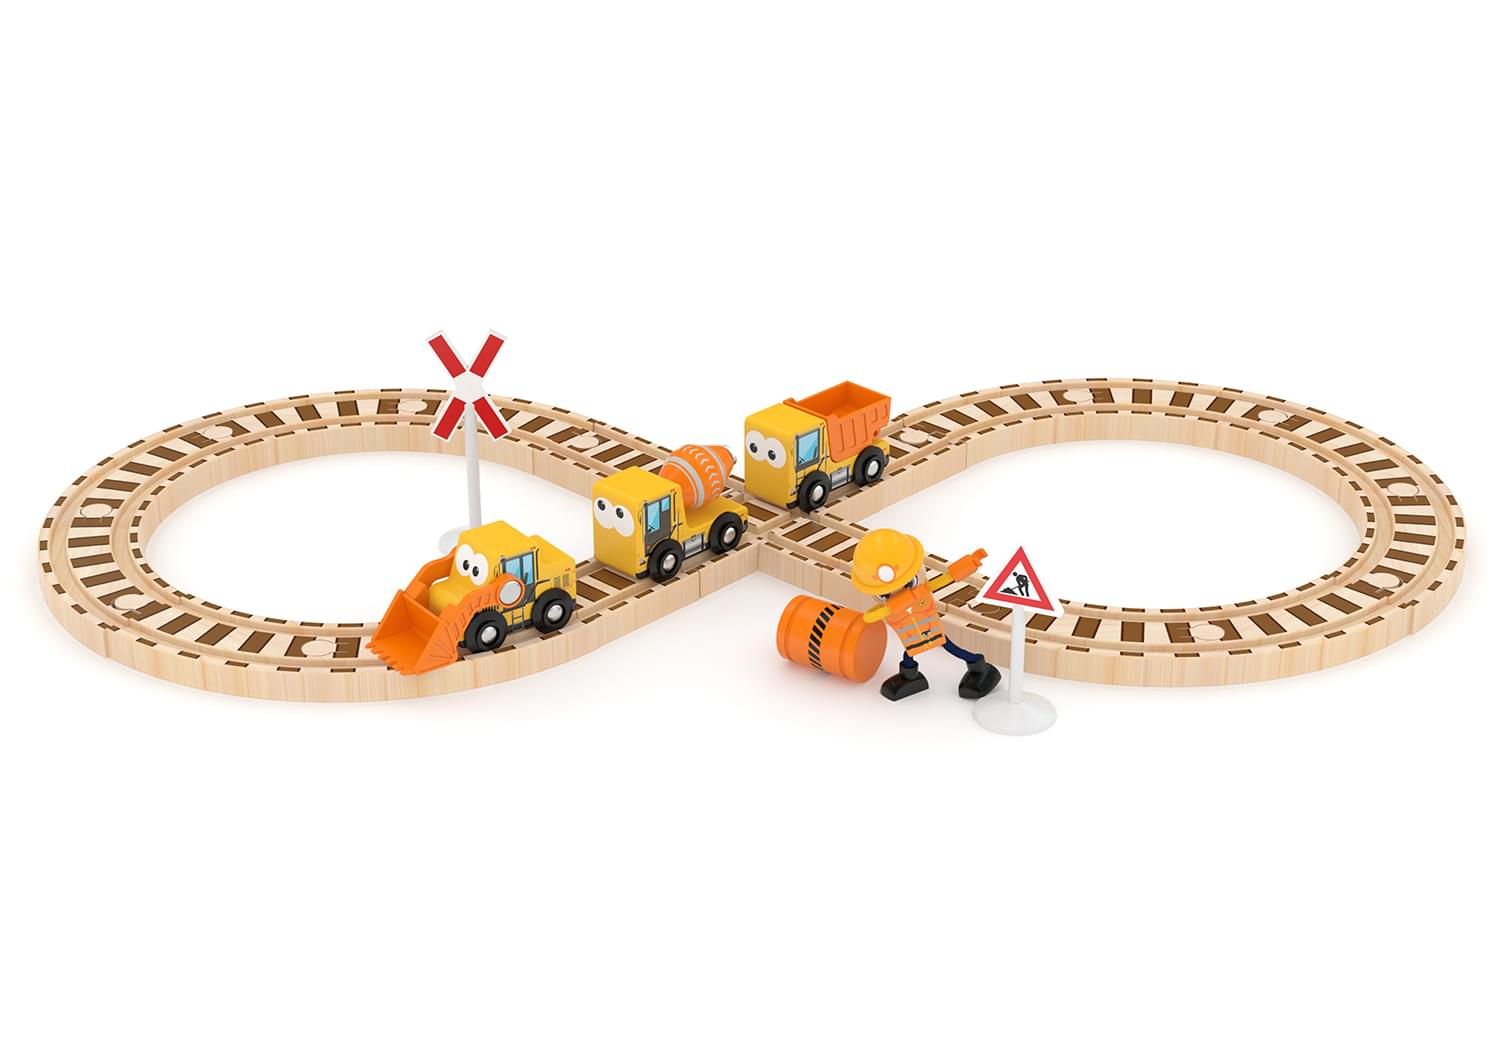 J'adore Construction Train and Rail Wooden Toy Playset with Figure